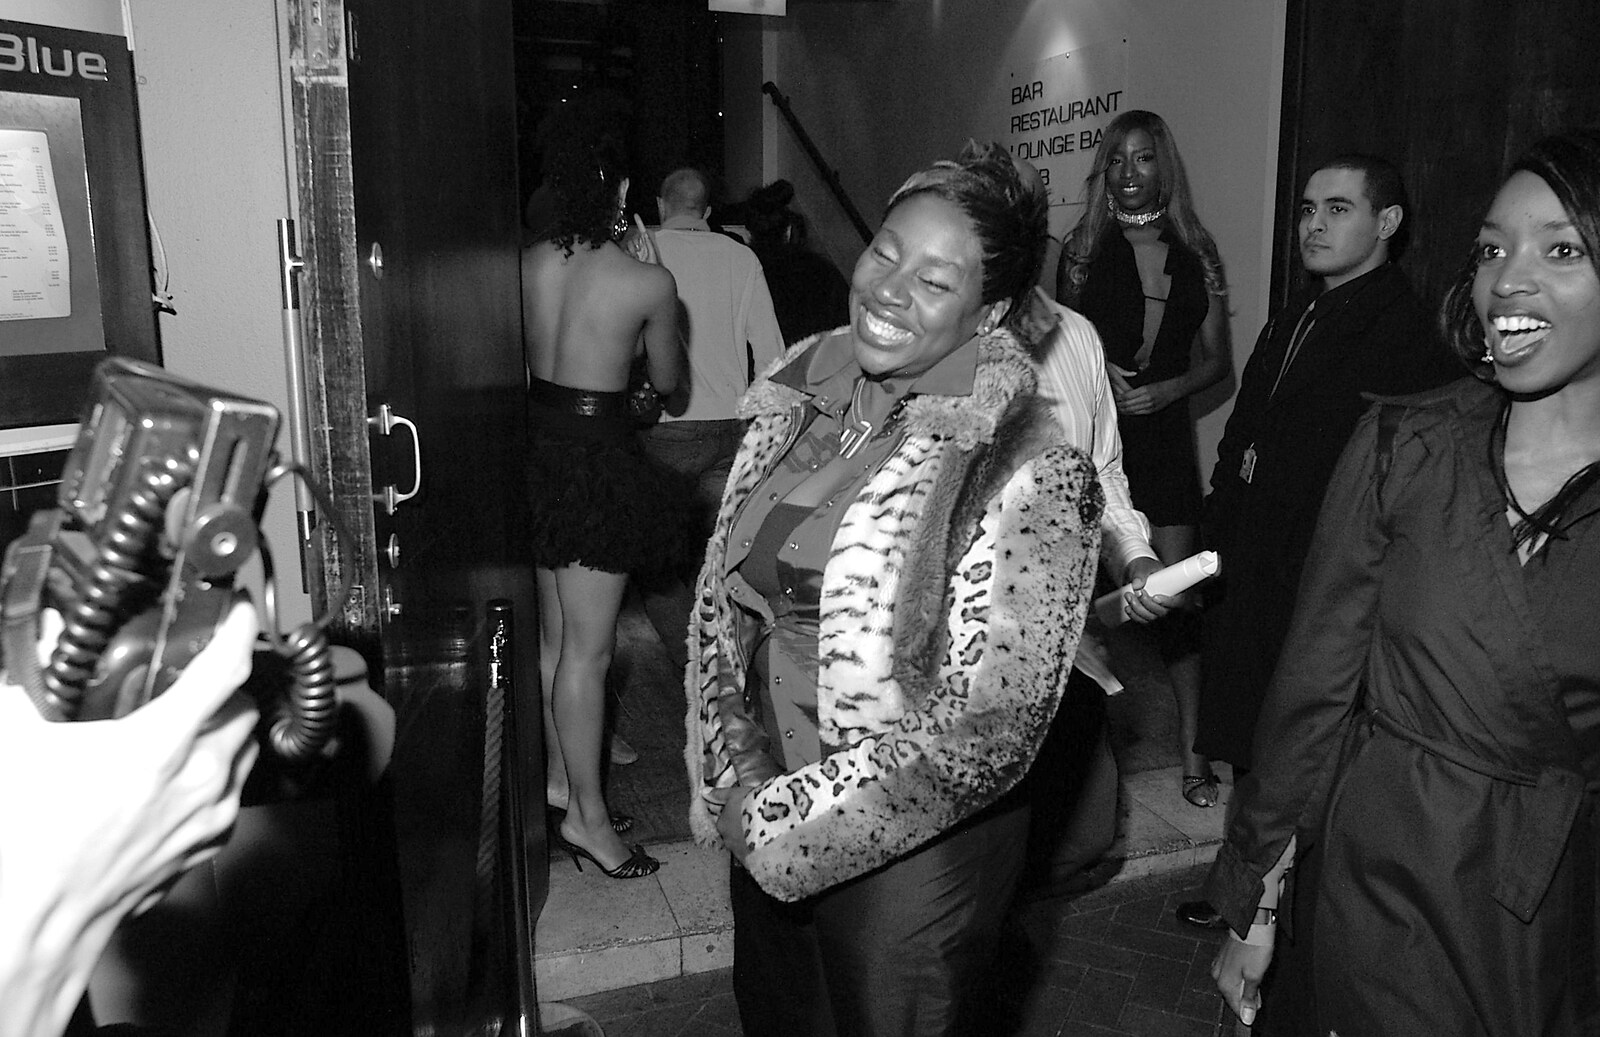 Comedian Gina Yashere from Celebrity Snappers: Becoming a Papparazzo, Leicester Square, London - 9th November 2005